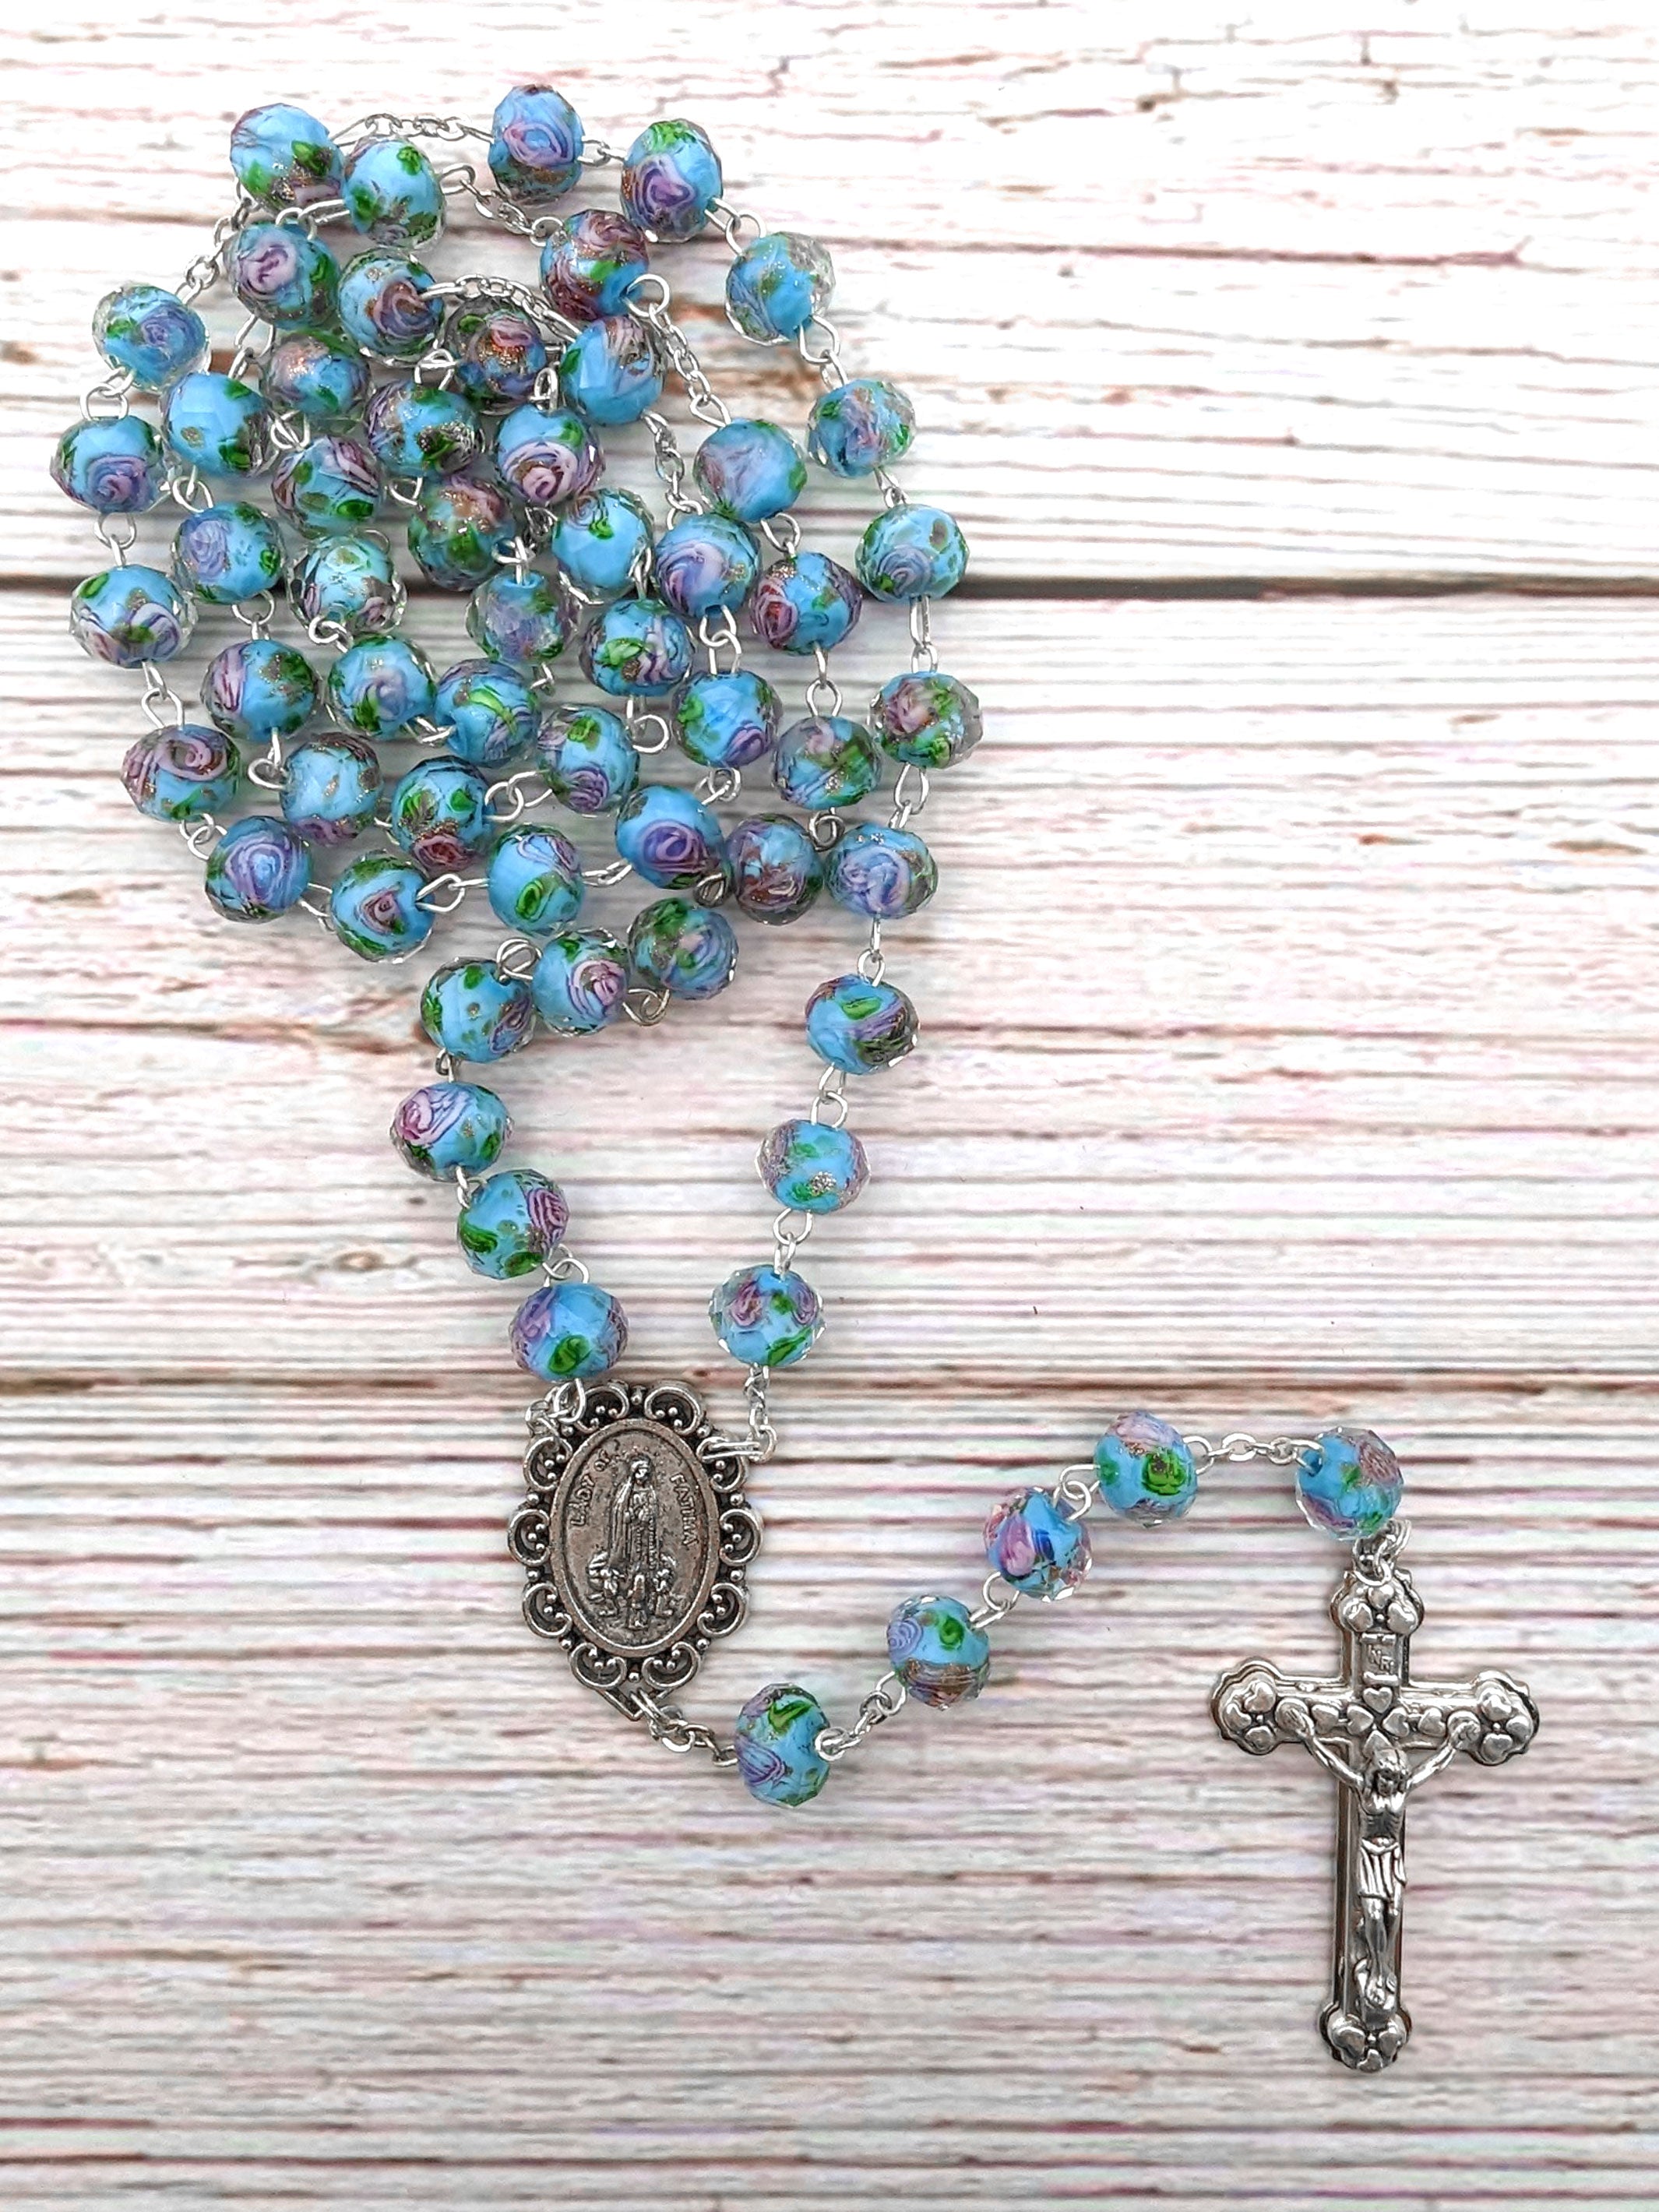 Handmade Our Lady of Fatima Rosary with Murano Glass Beads Blue